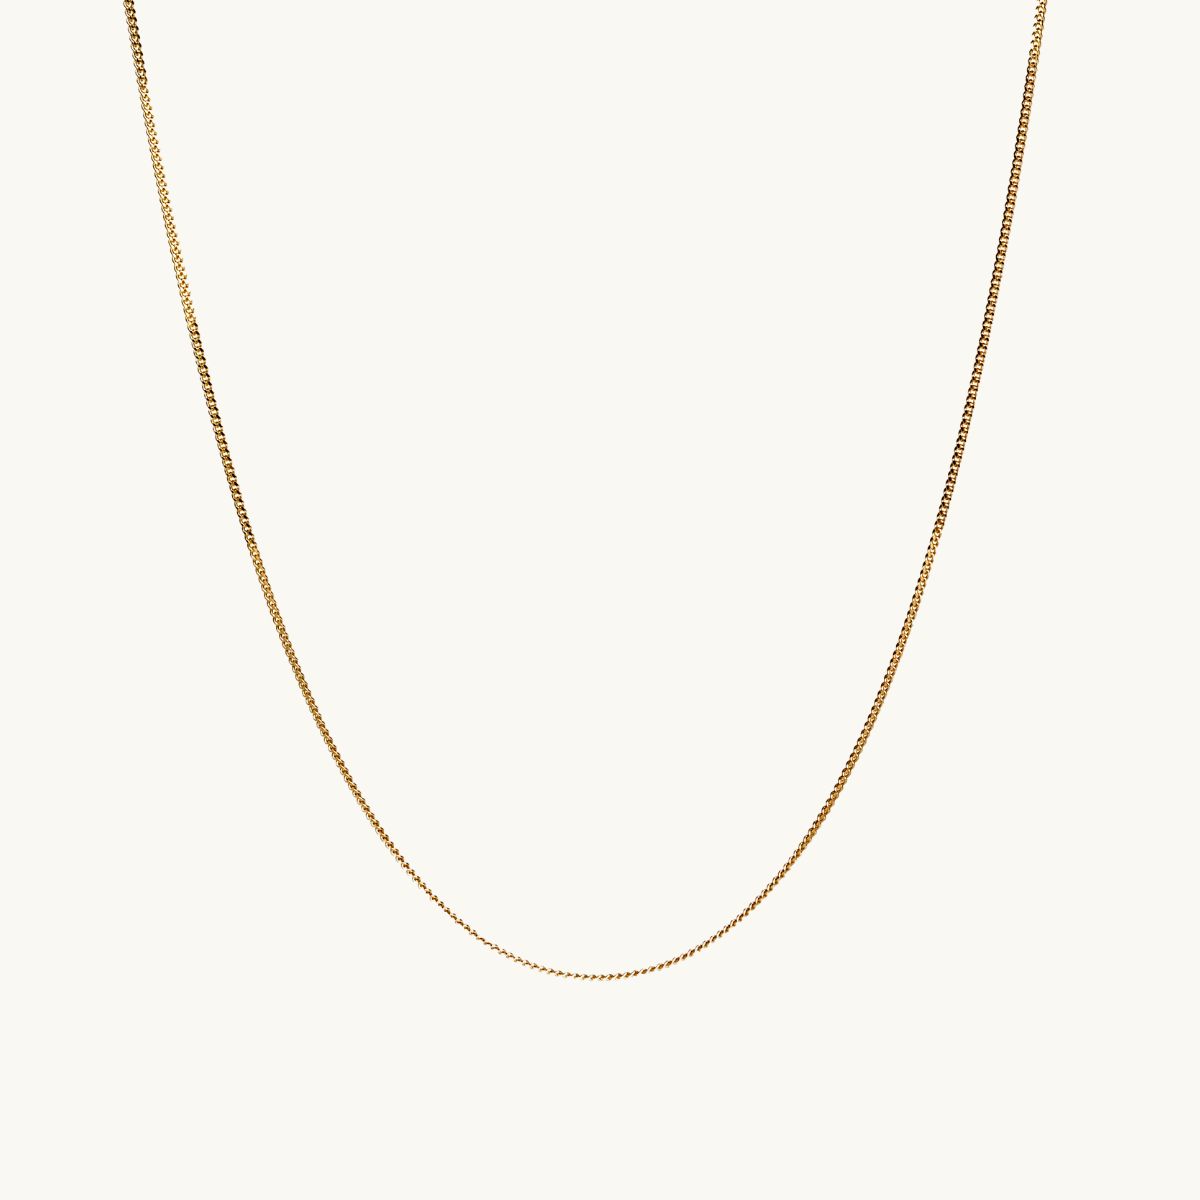 Necklace chain in gold